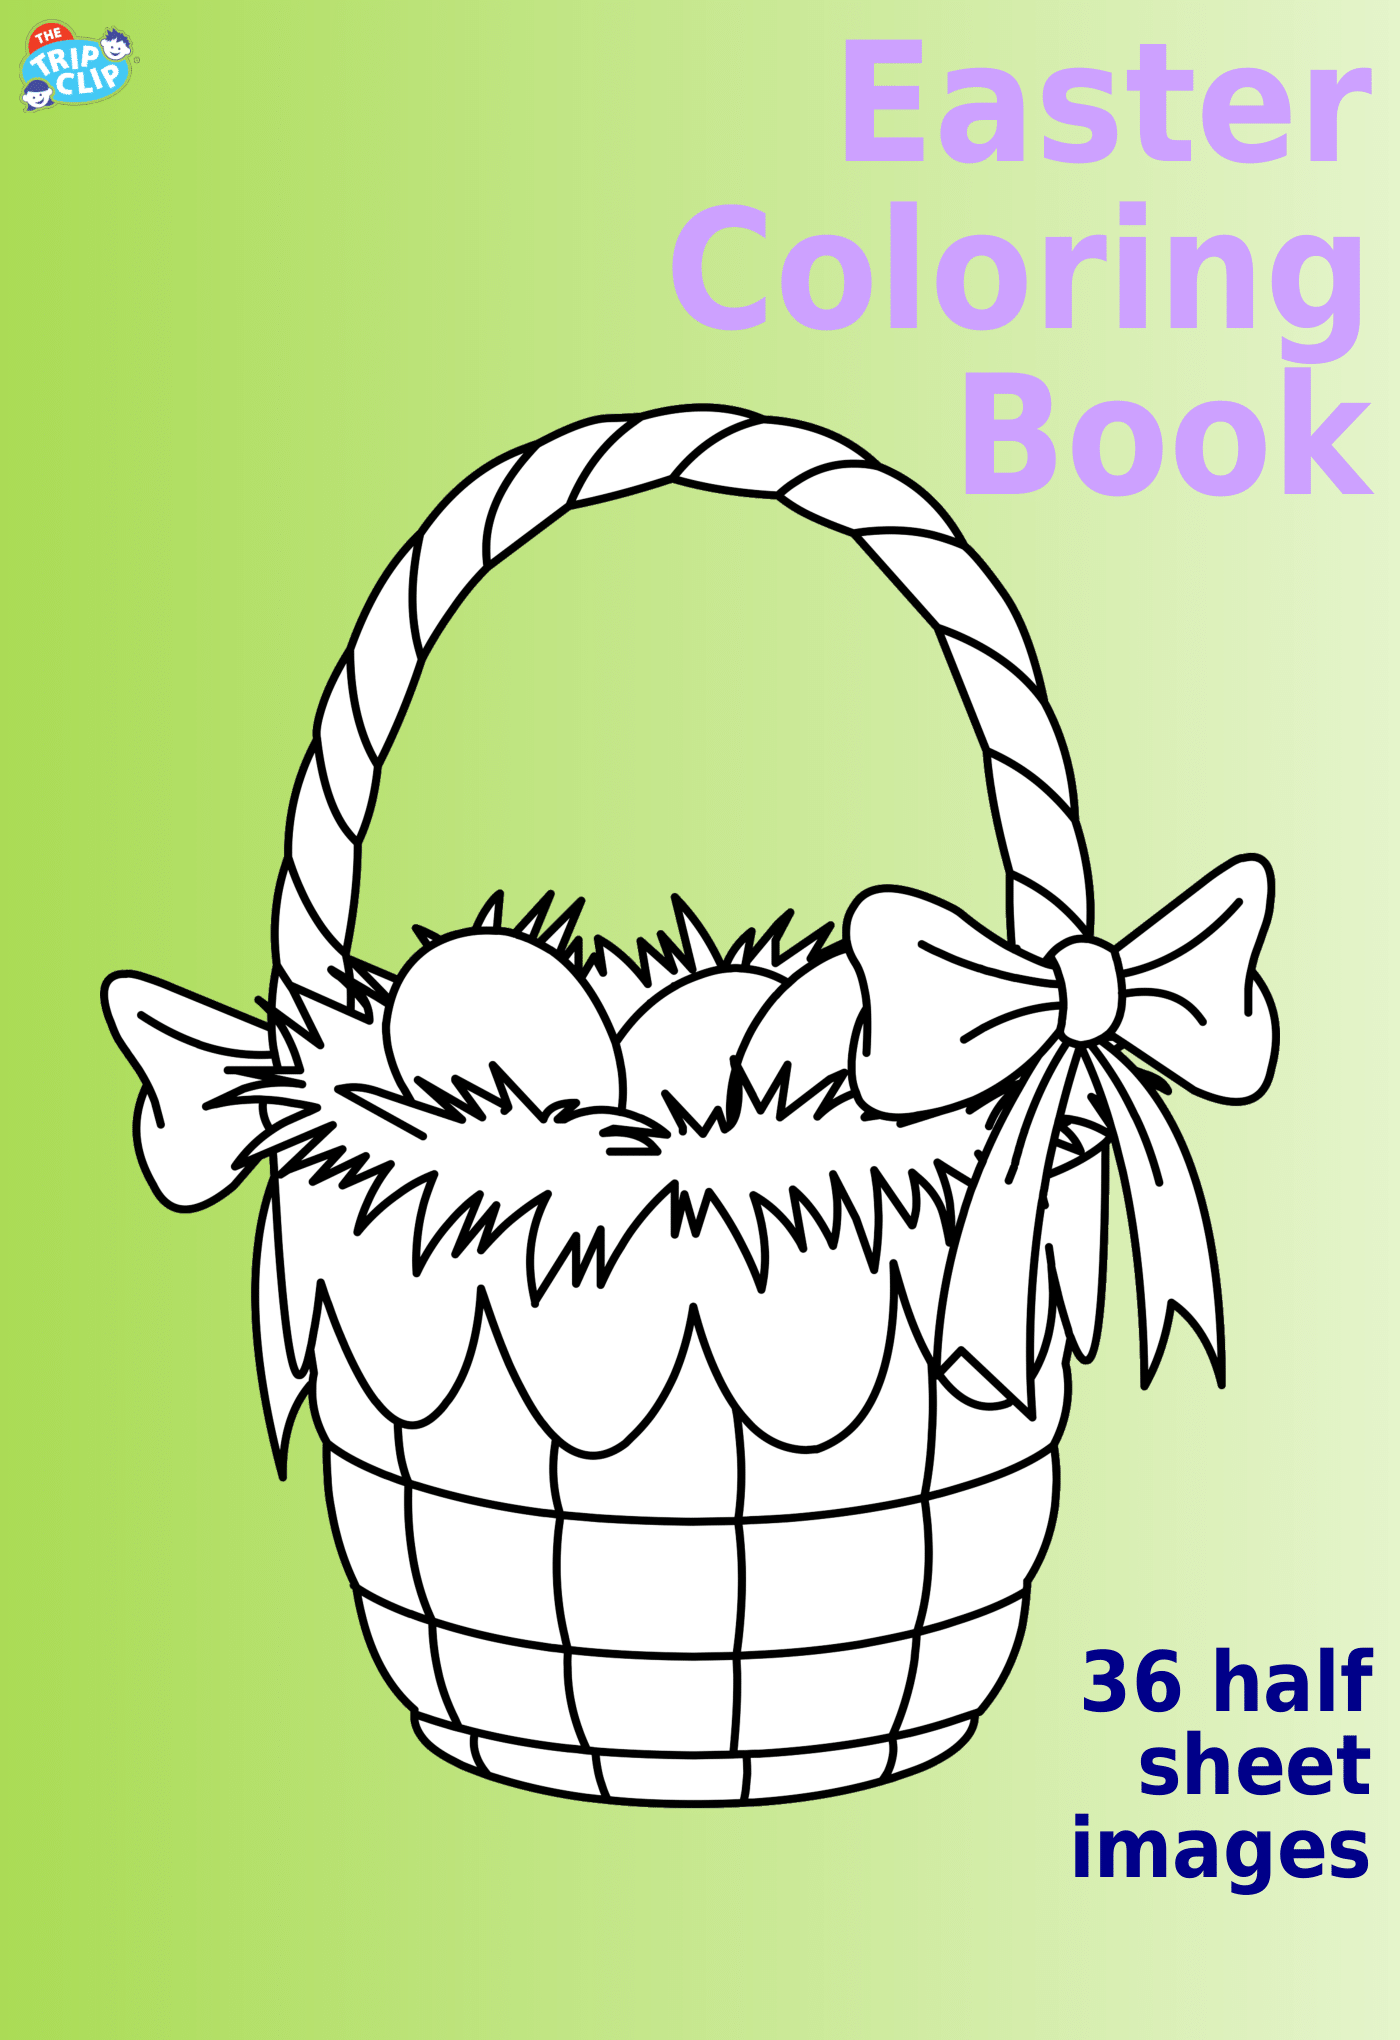 53 coloring pages, showing an easter basket